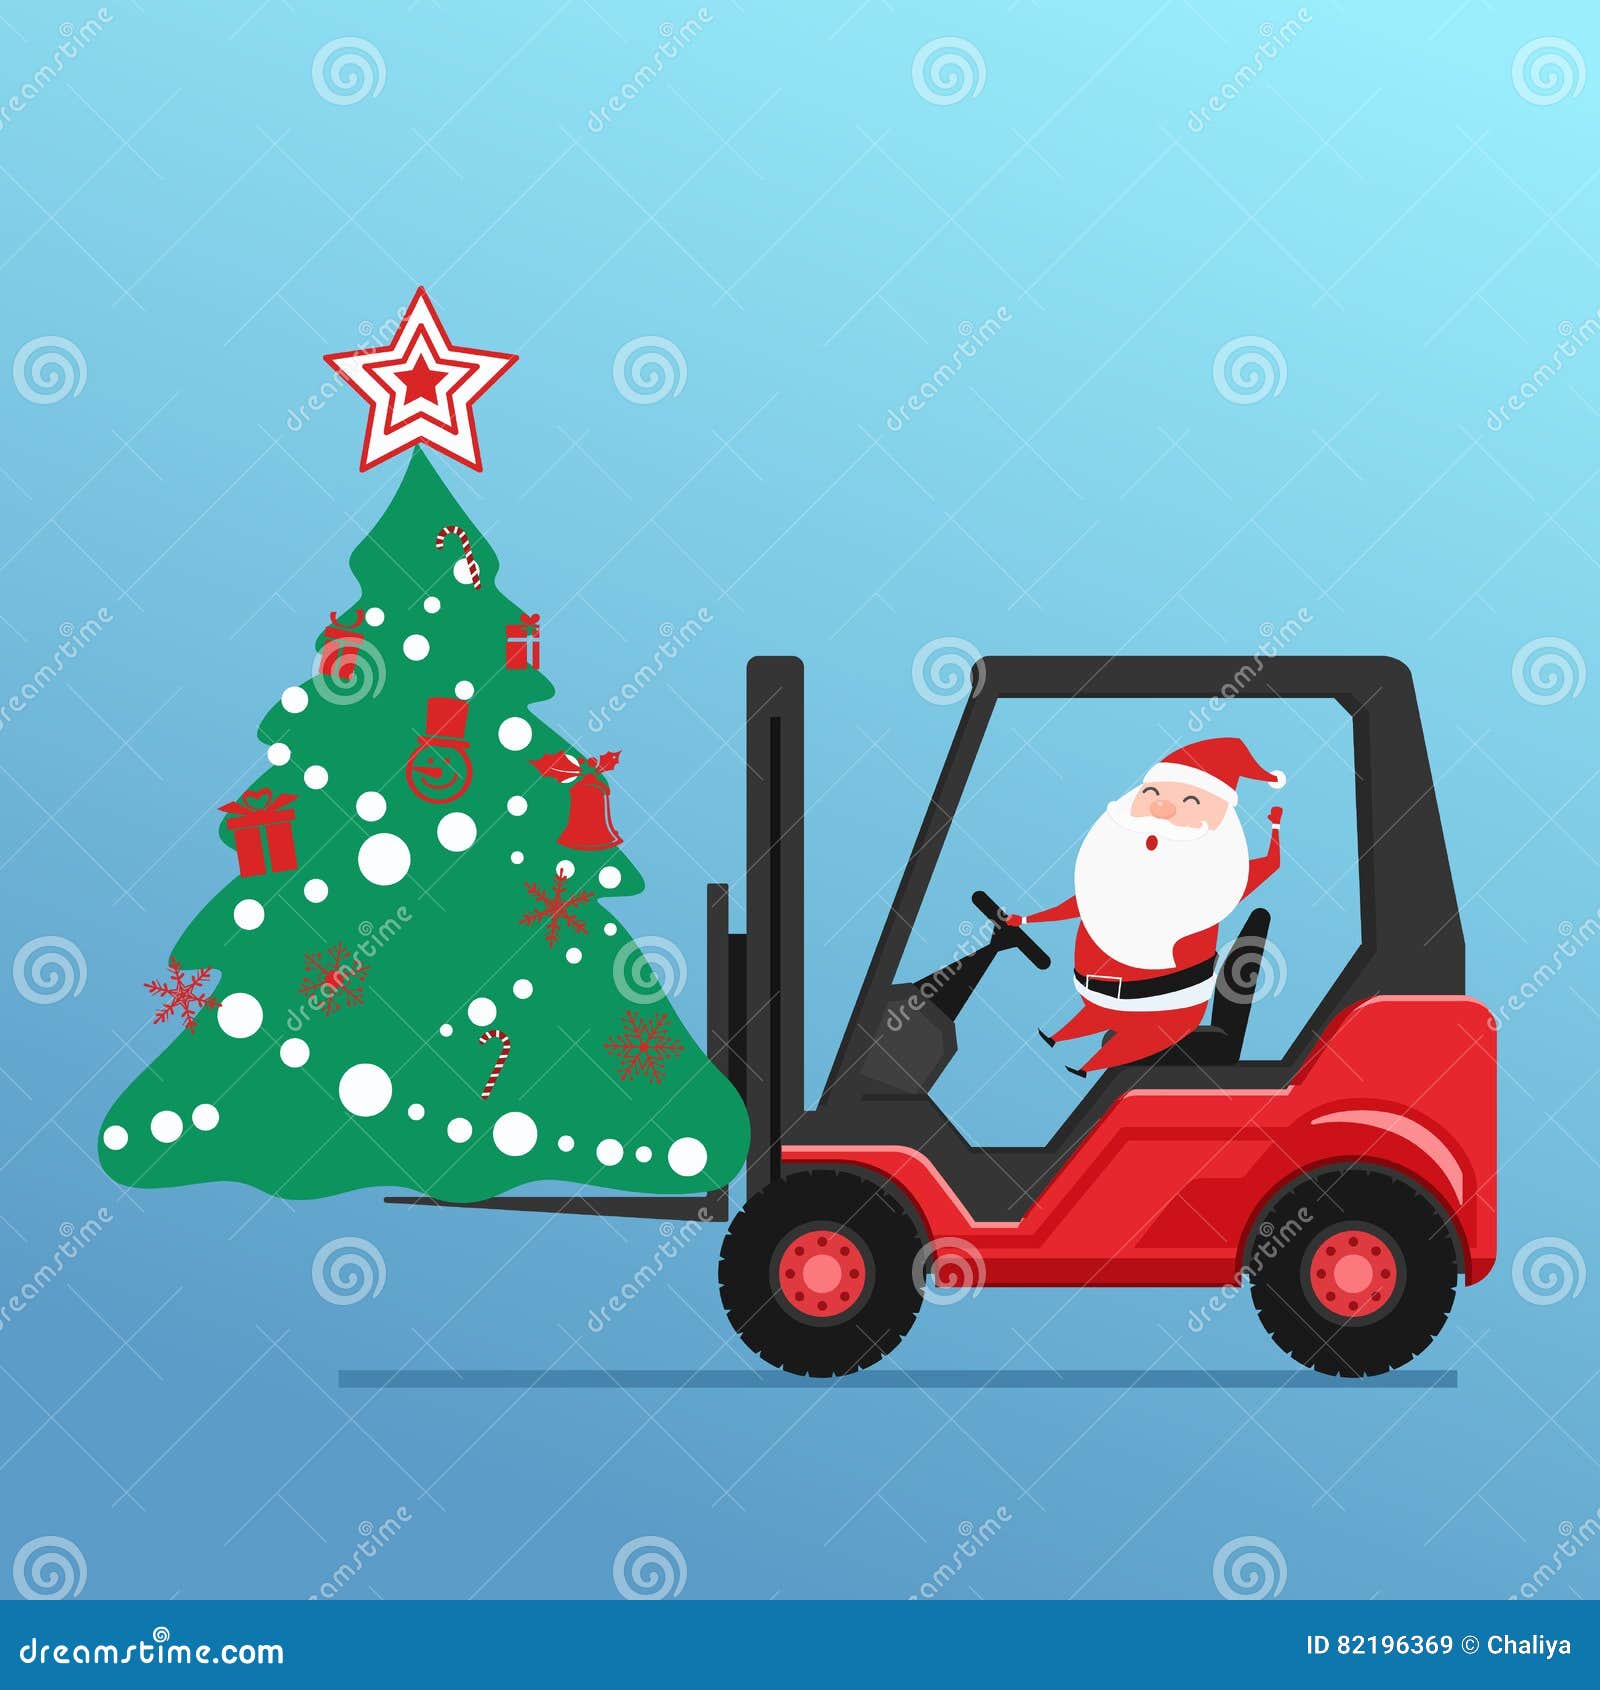 Cute Santa Claus Drives Forklift Truck Loading Christmas Tree And Gift Boxes Stock Vector Illustration Of Flat Vector 82196369